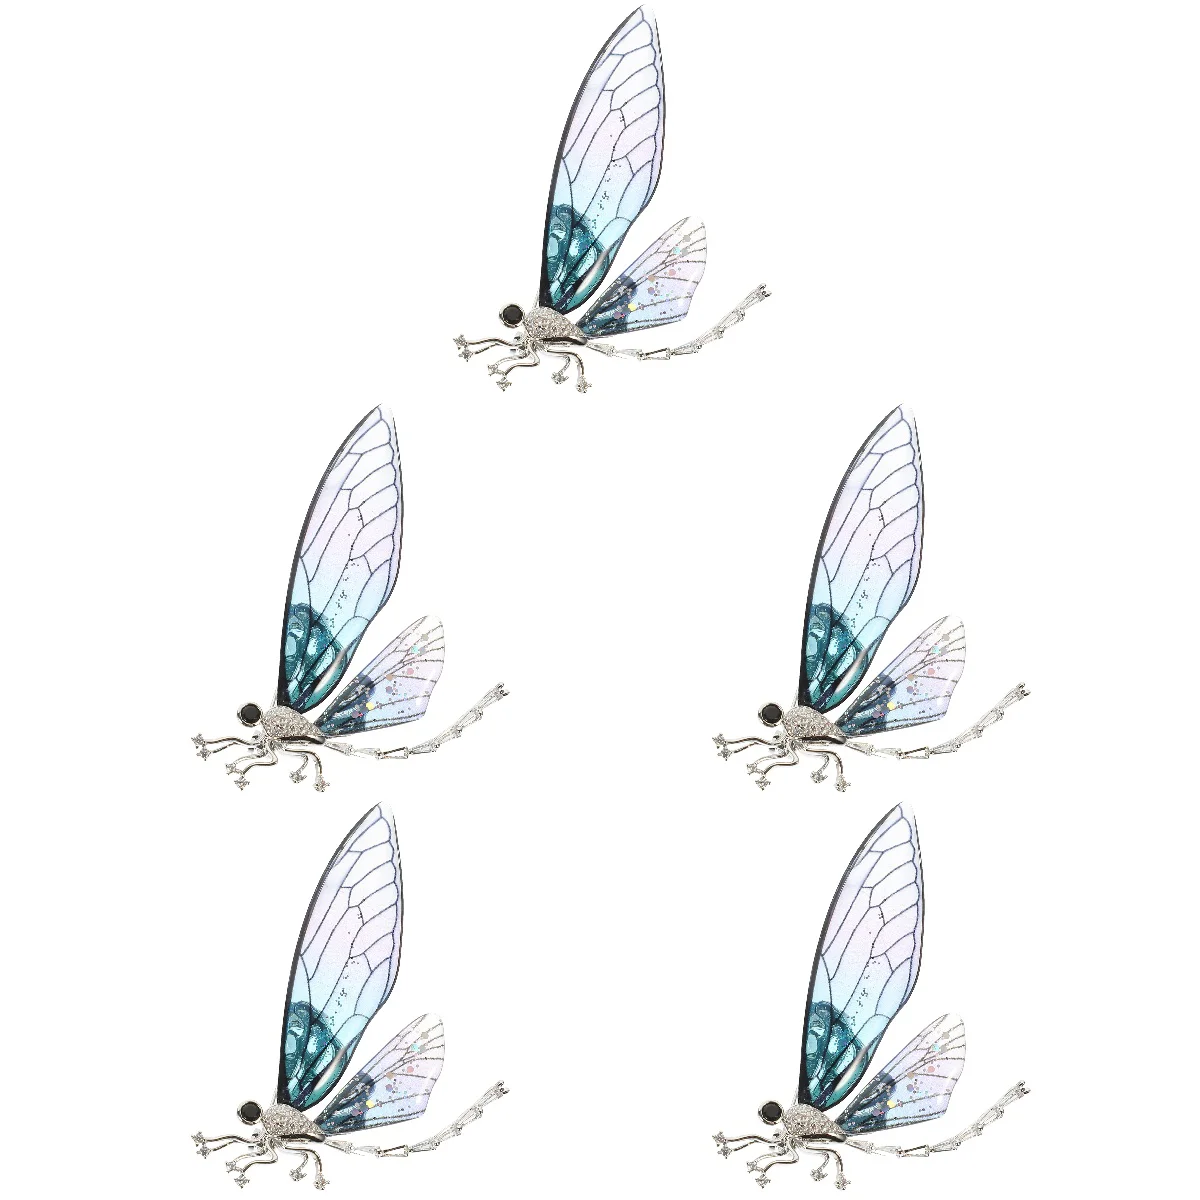 

5 Count Dragonfly Corsage Brooch Insect Lapel Pin Women Brooches Fashion Clothing Scarf For Hats Bee Decorative Retro Alloy